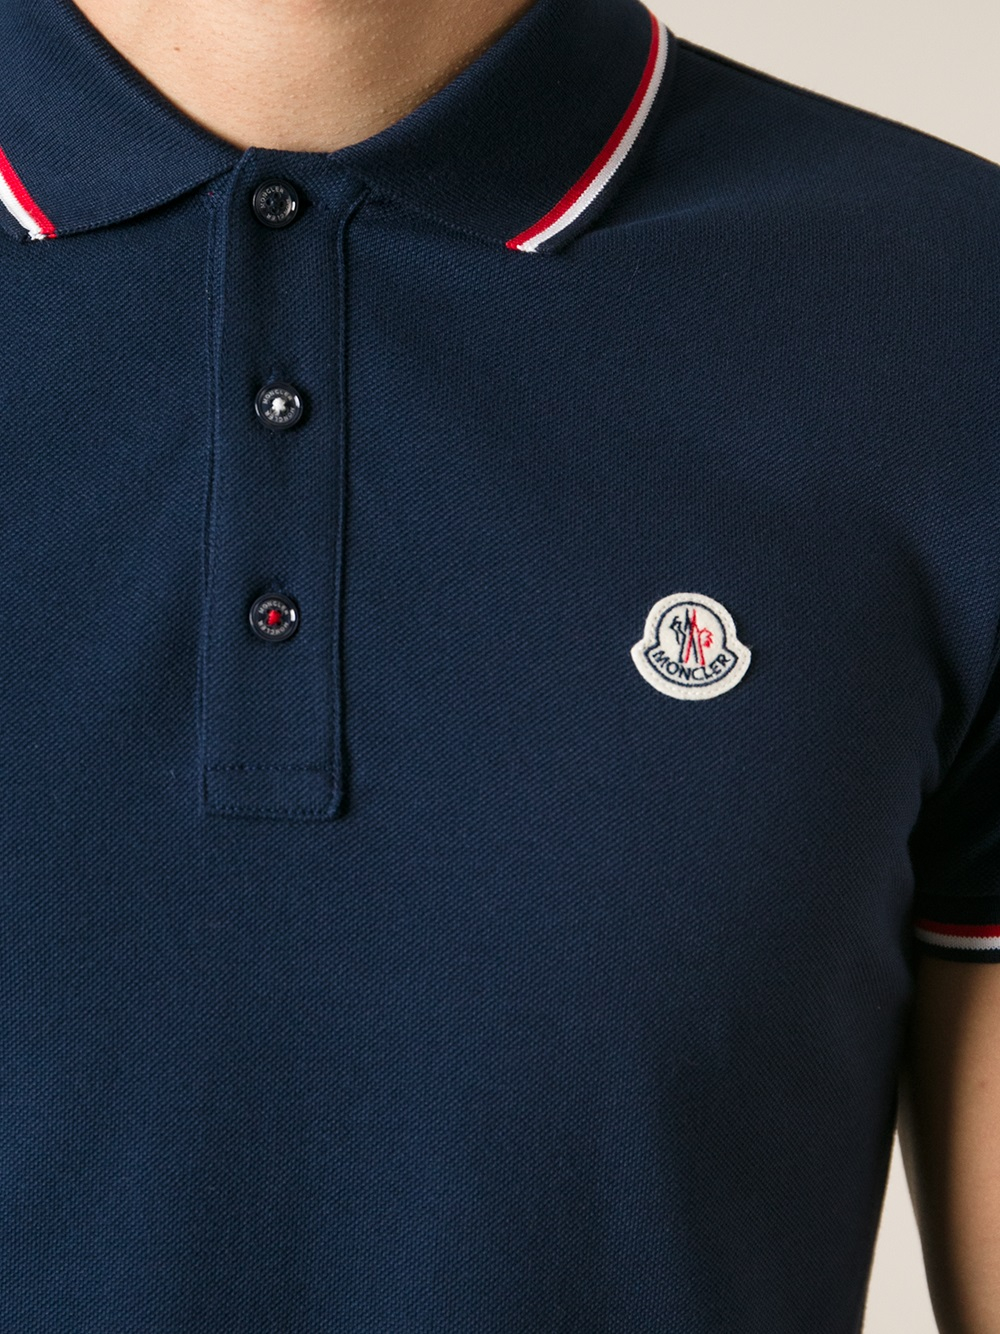 moncler polo shirt sale Cheaper Than Retail Price> Buy Clothing,  Accessories and lifestyle products for women & men -